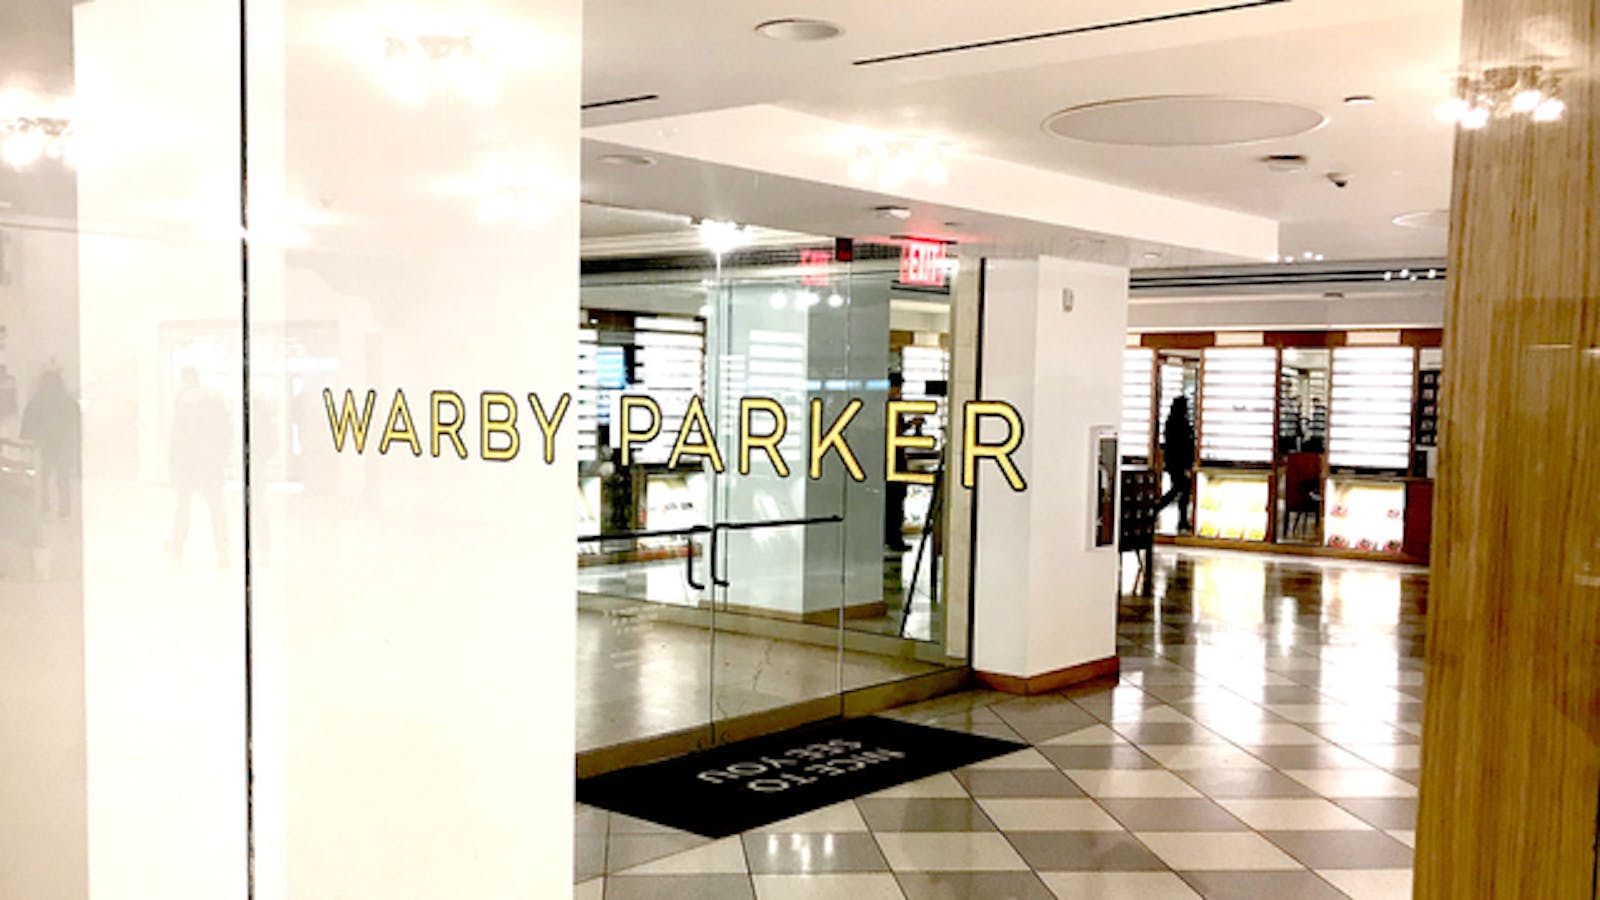 A Warby Parker store in New York. Photo by Mike Sullivan